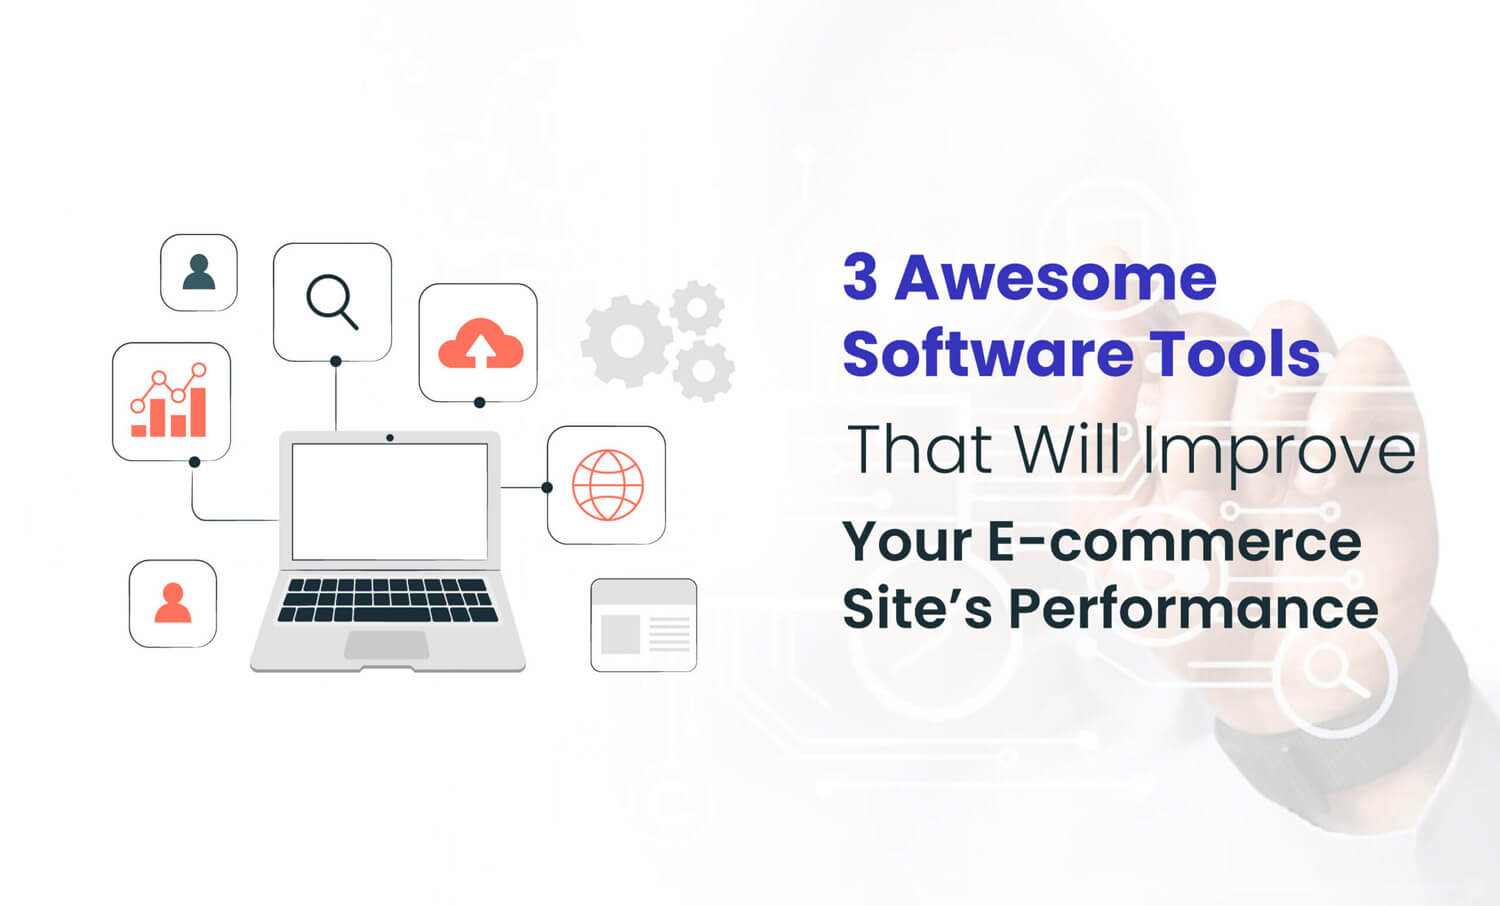 software tools that will improve site performance